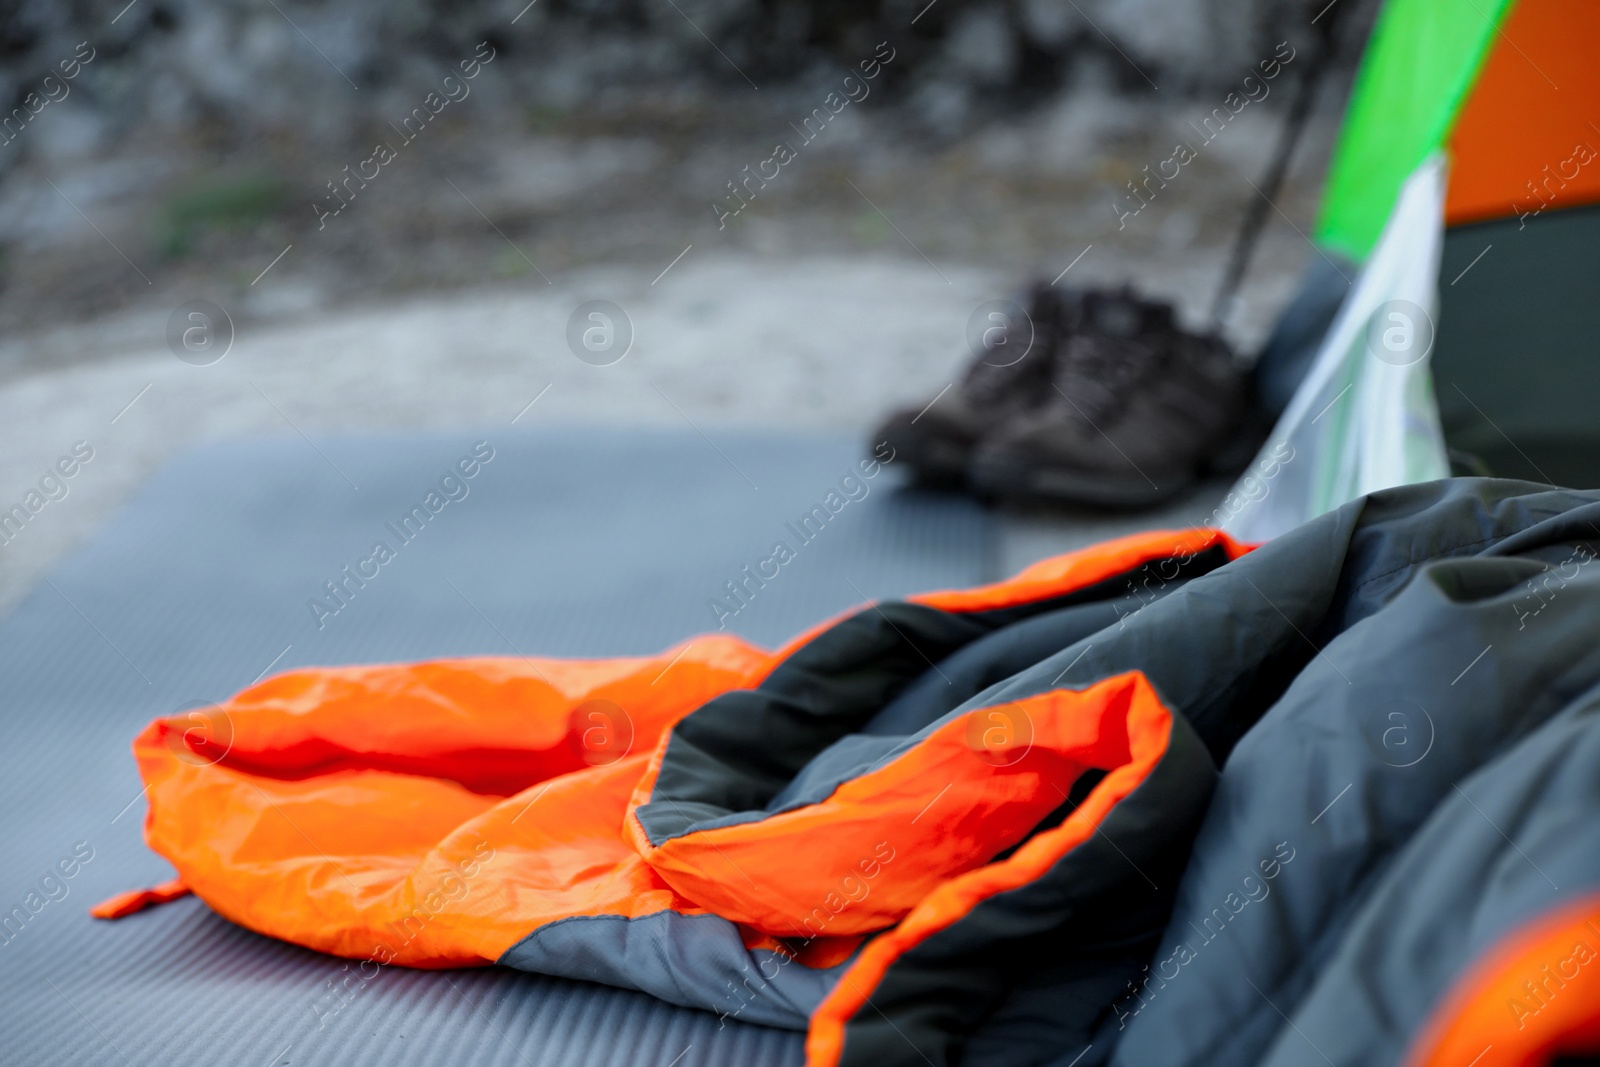 Photo of Sleeping bag and other camping gear outdoors